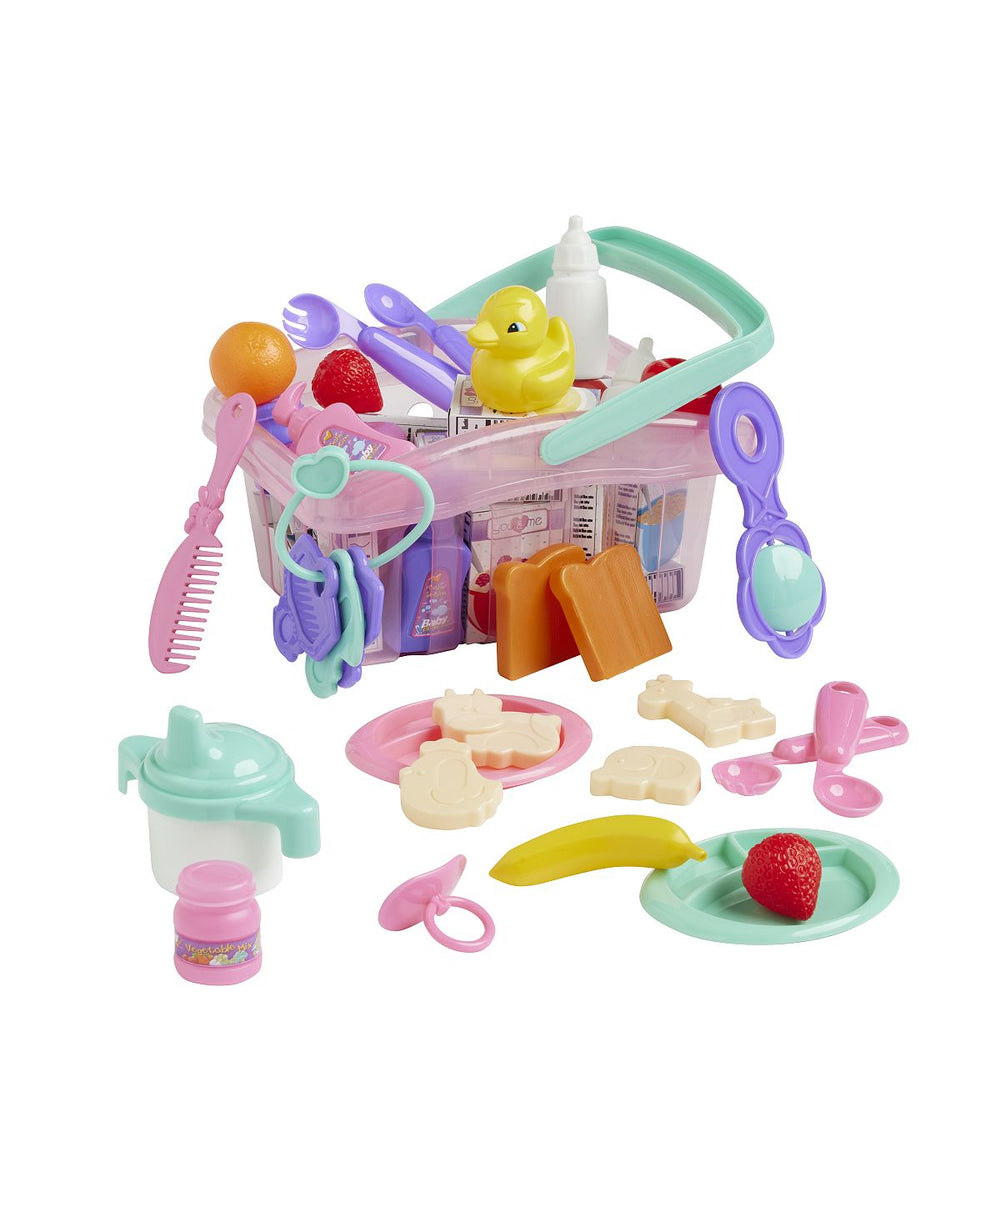 Toys R Us 50-Piece Baby Doll Accessory Playset